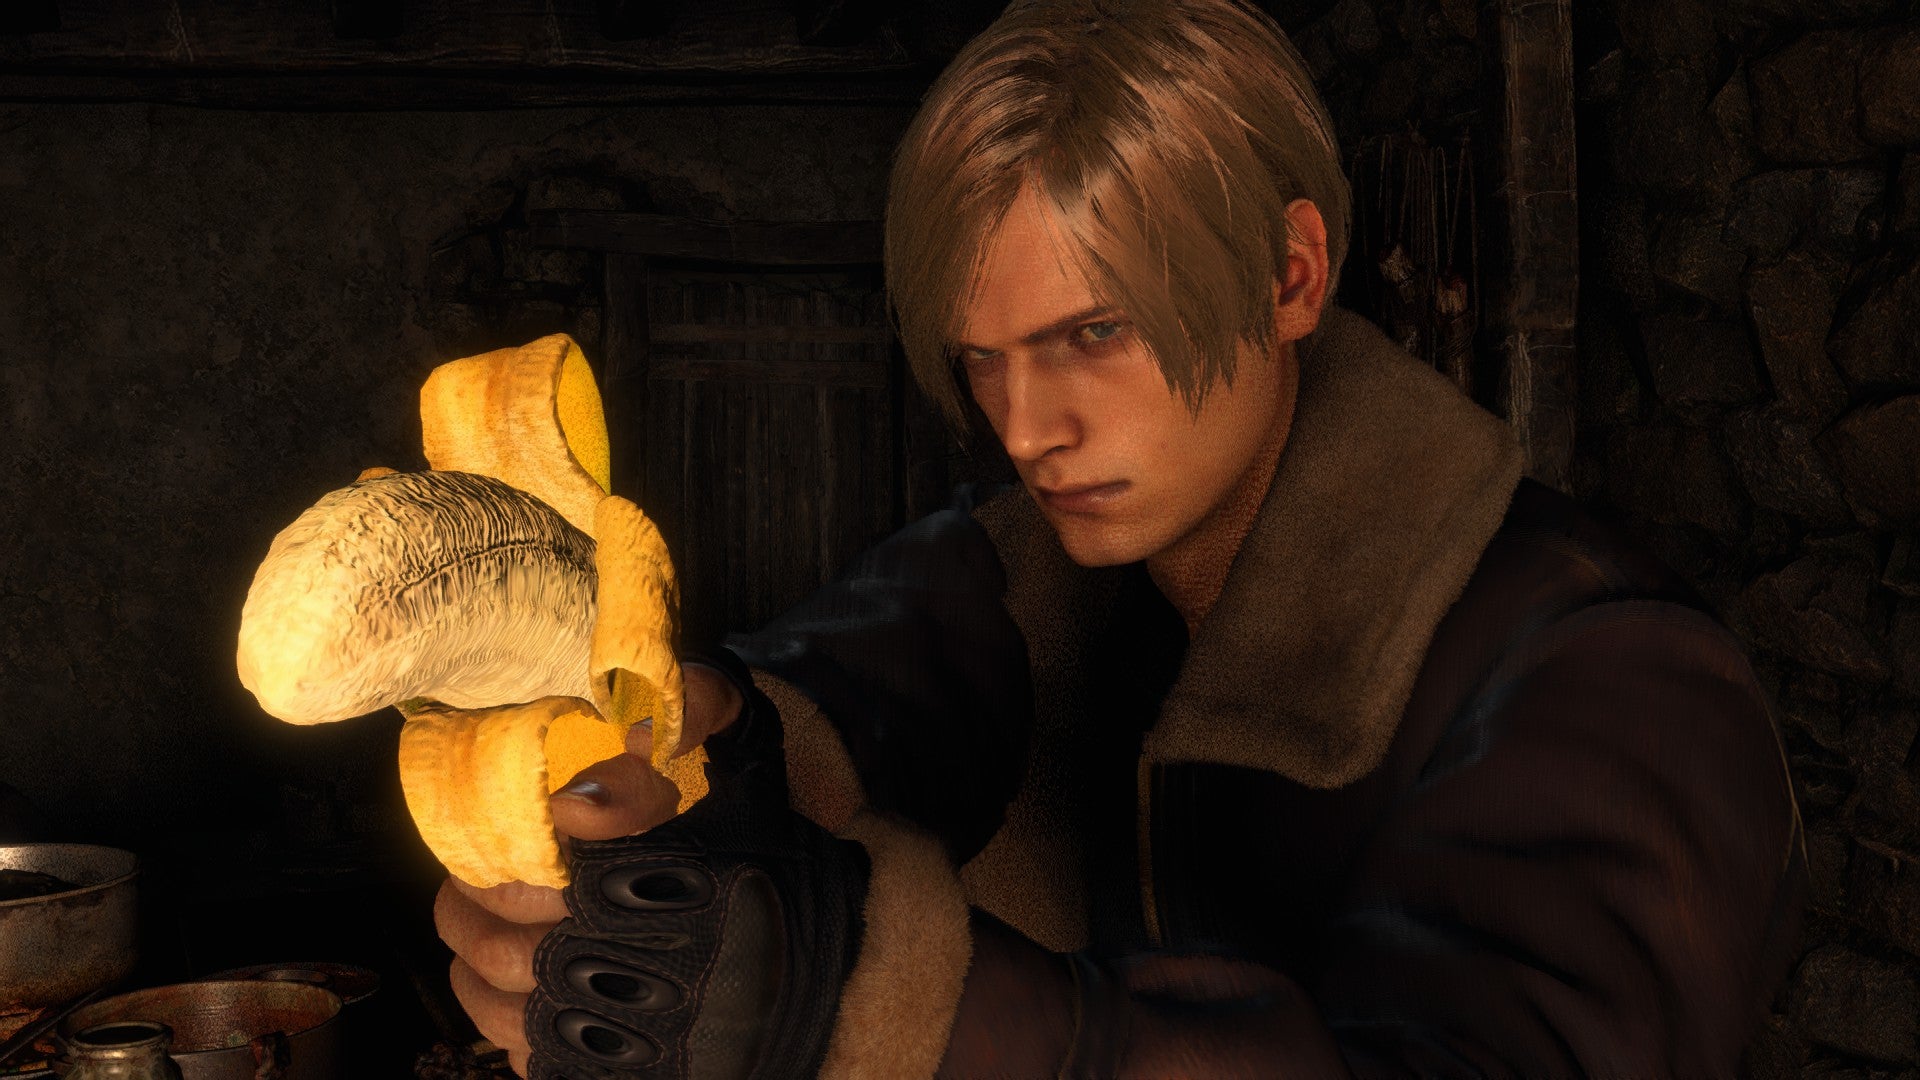 Resident Evil 4's Leon Kennedy holds a banana instead of a gun, thanks to a mod.